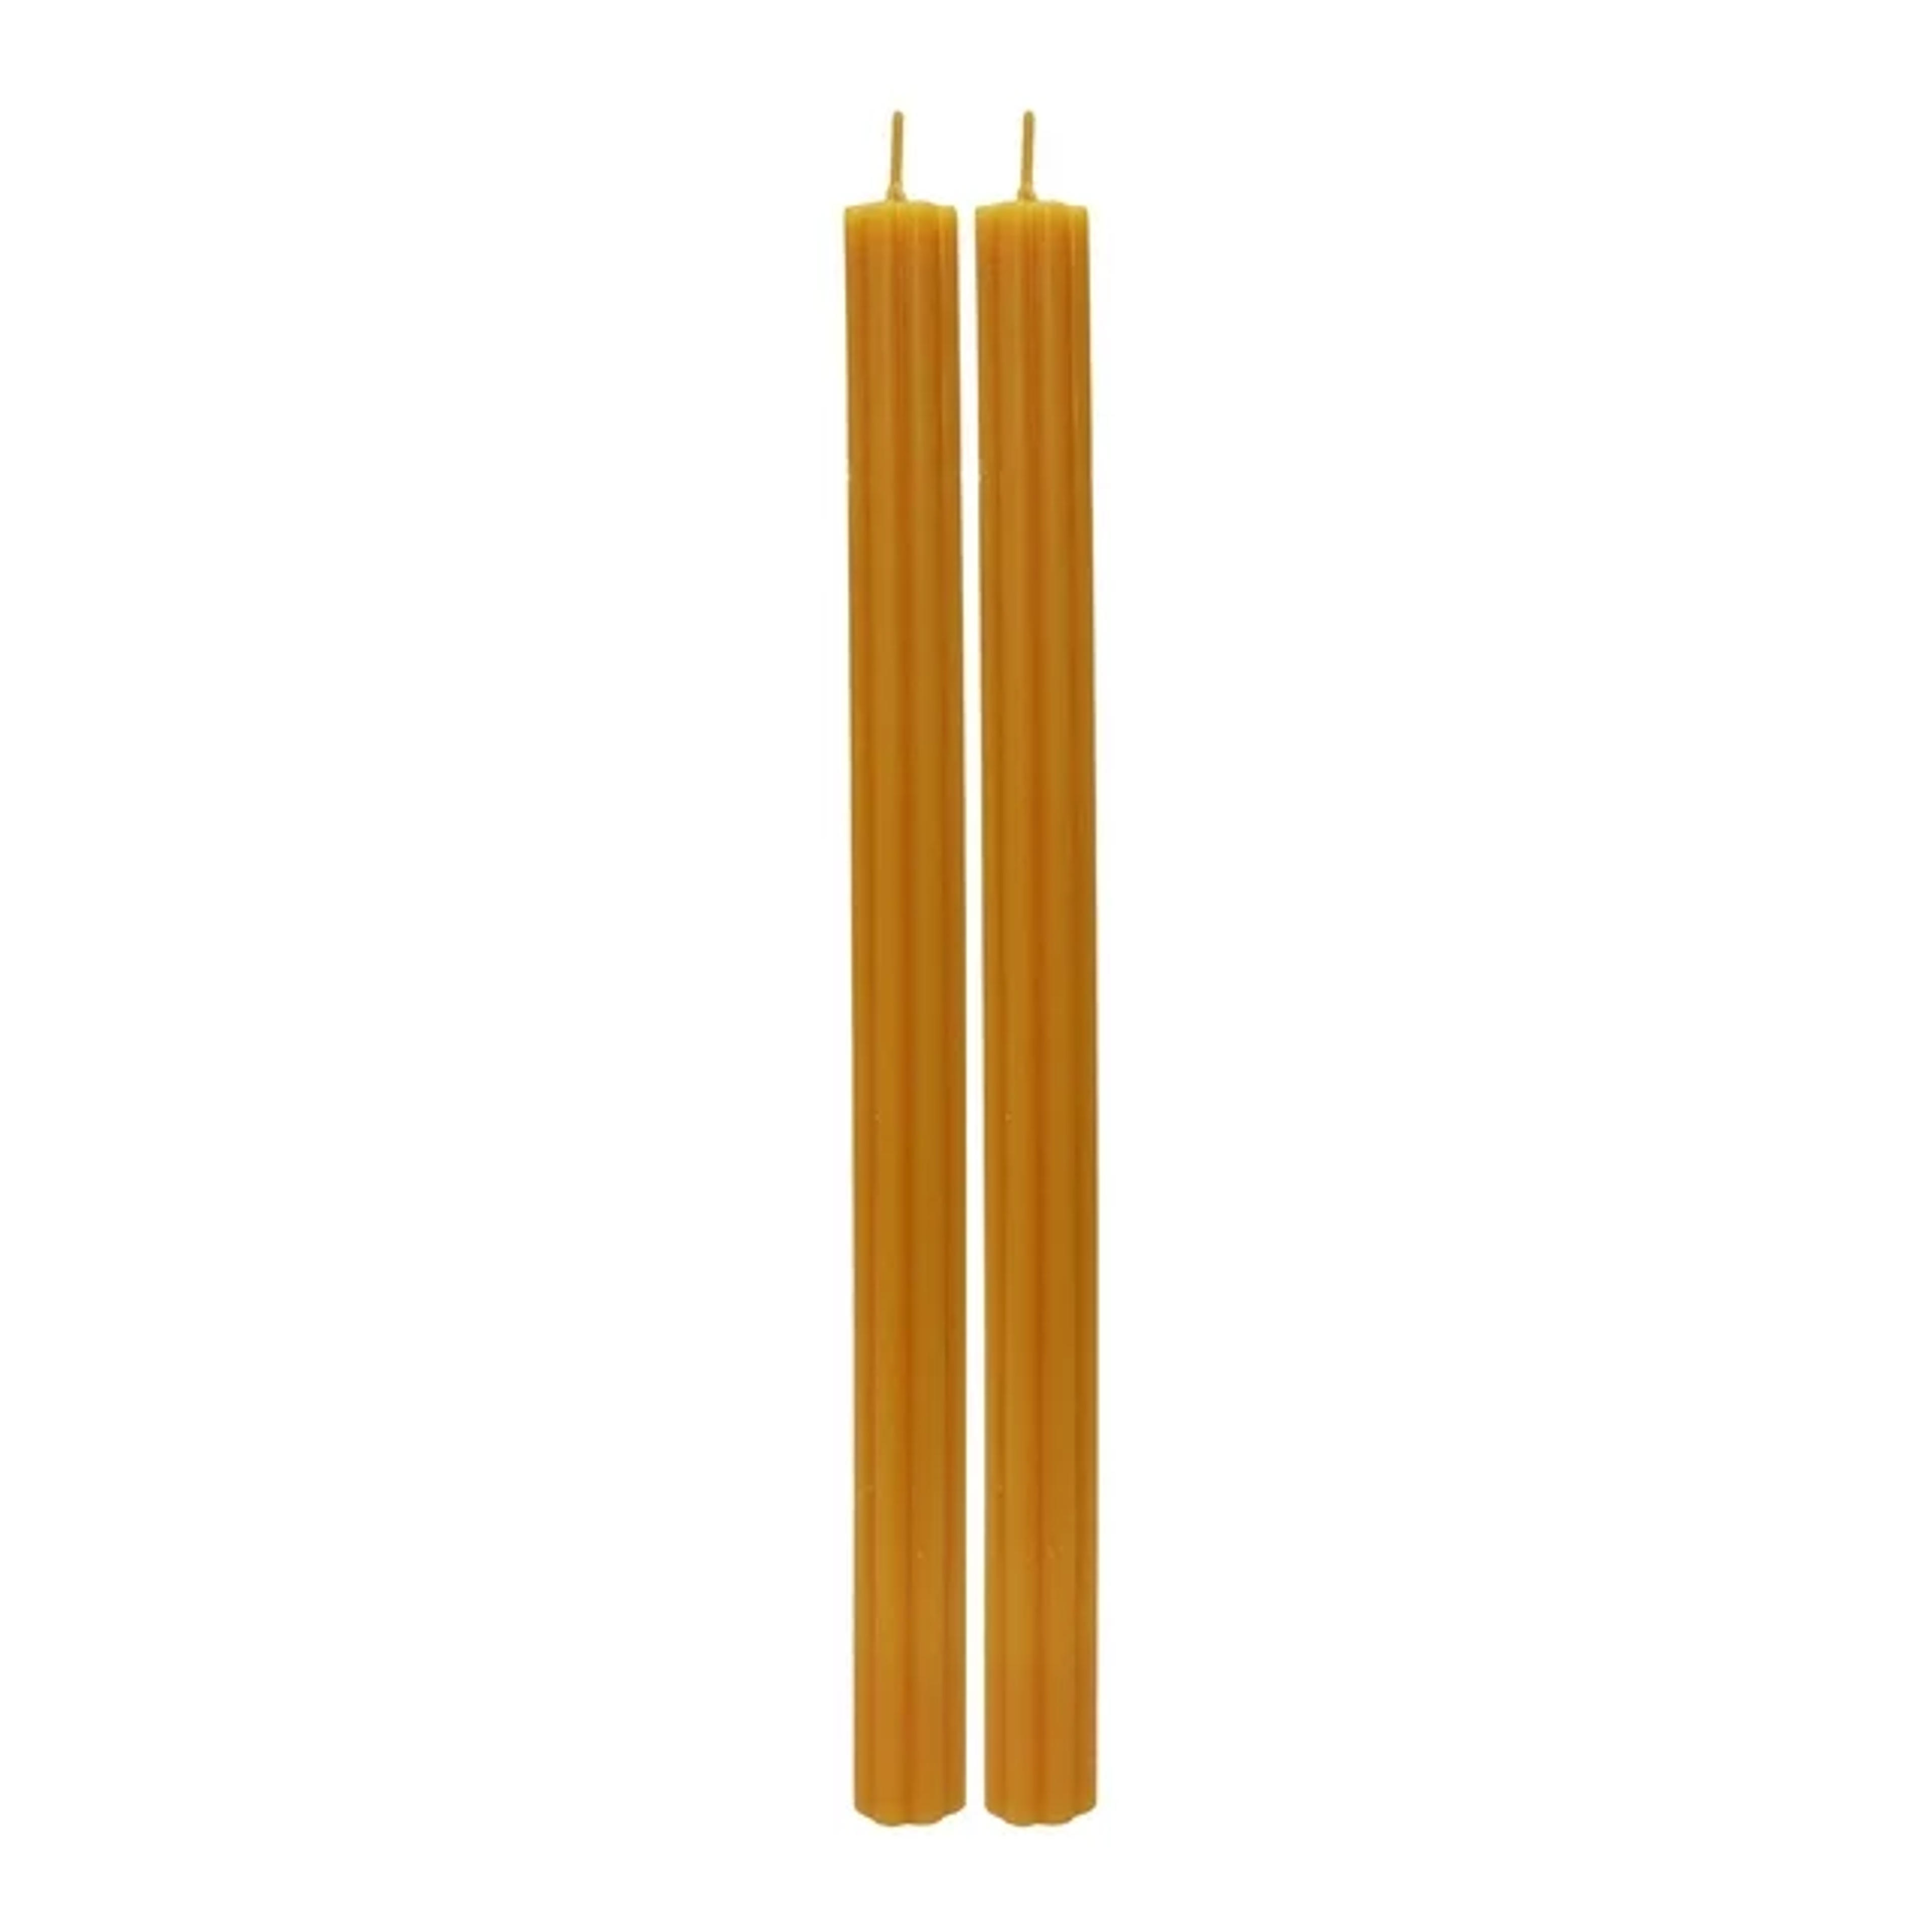 Better Homes & Gardens Unscented Taper Candles, Orange, 2-Pack, 11 inches Height - Walmart.com